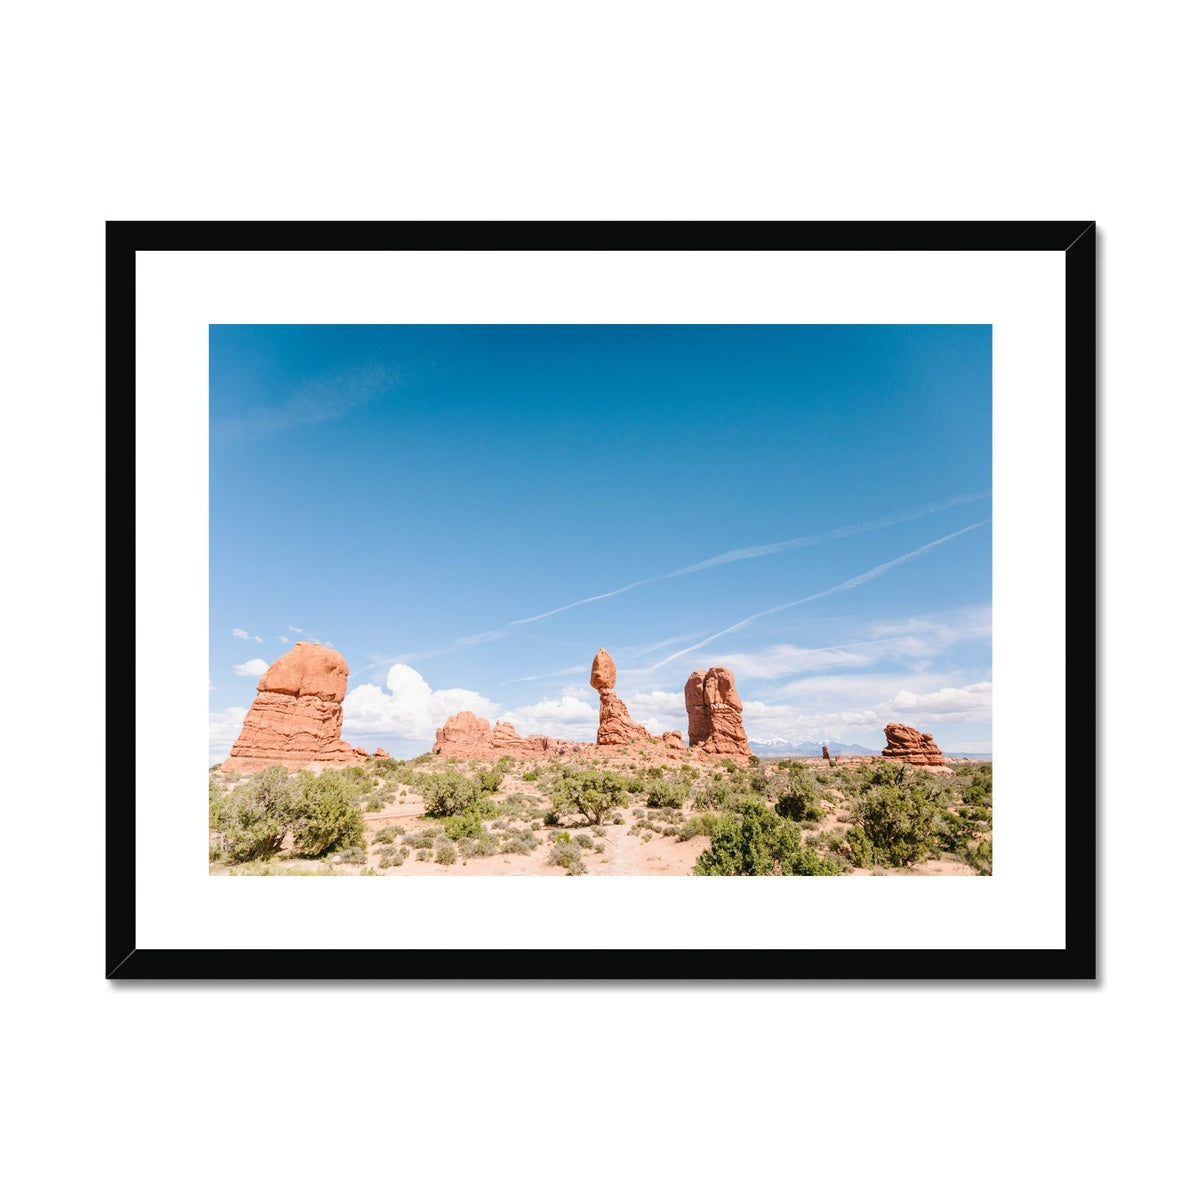 ARCHES NATIONAL PARK Framed & Mounted Print